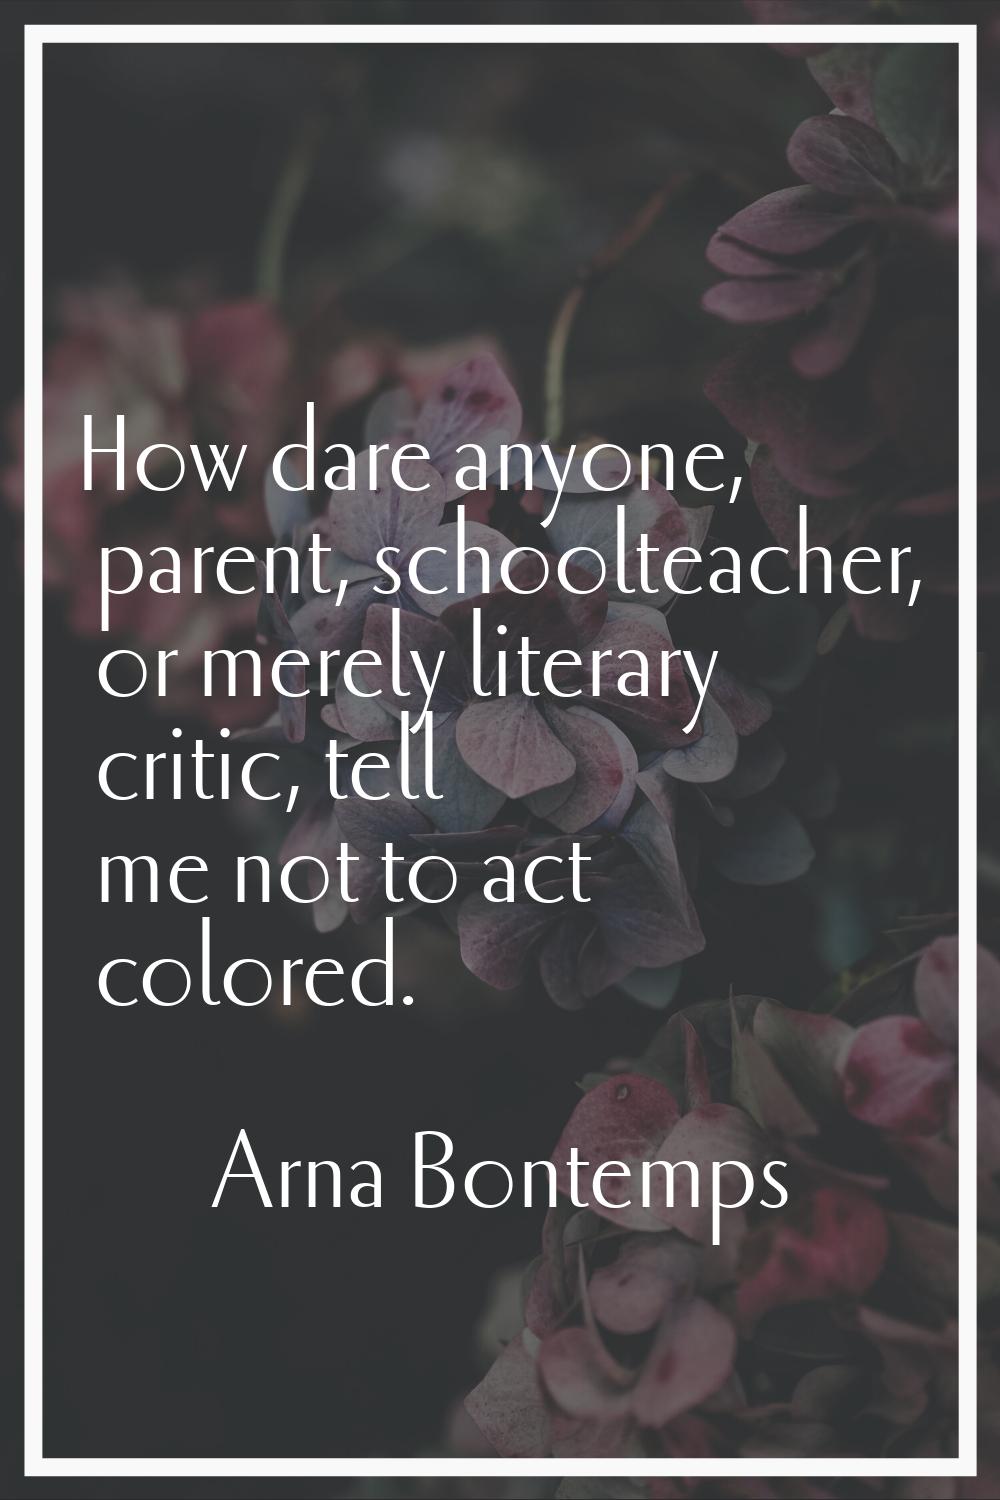 How dare anyone, parent, schoolteacher, or merely literary critic, tell me not to act colored.